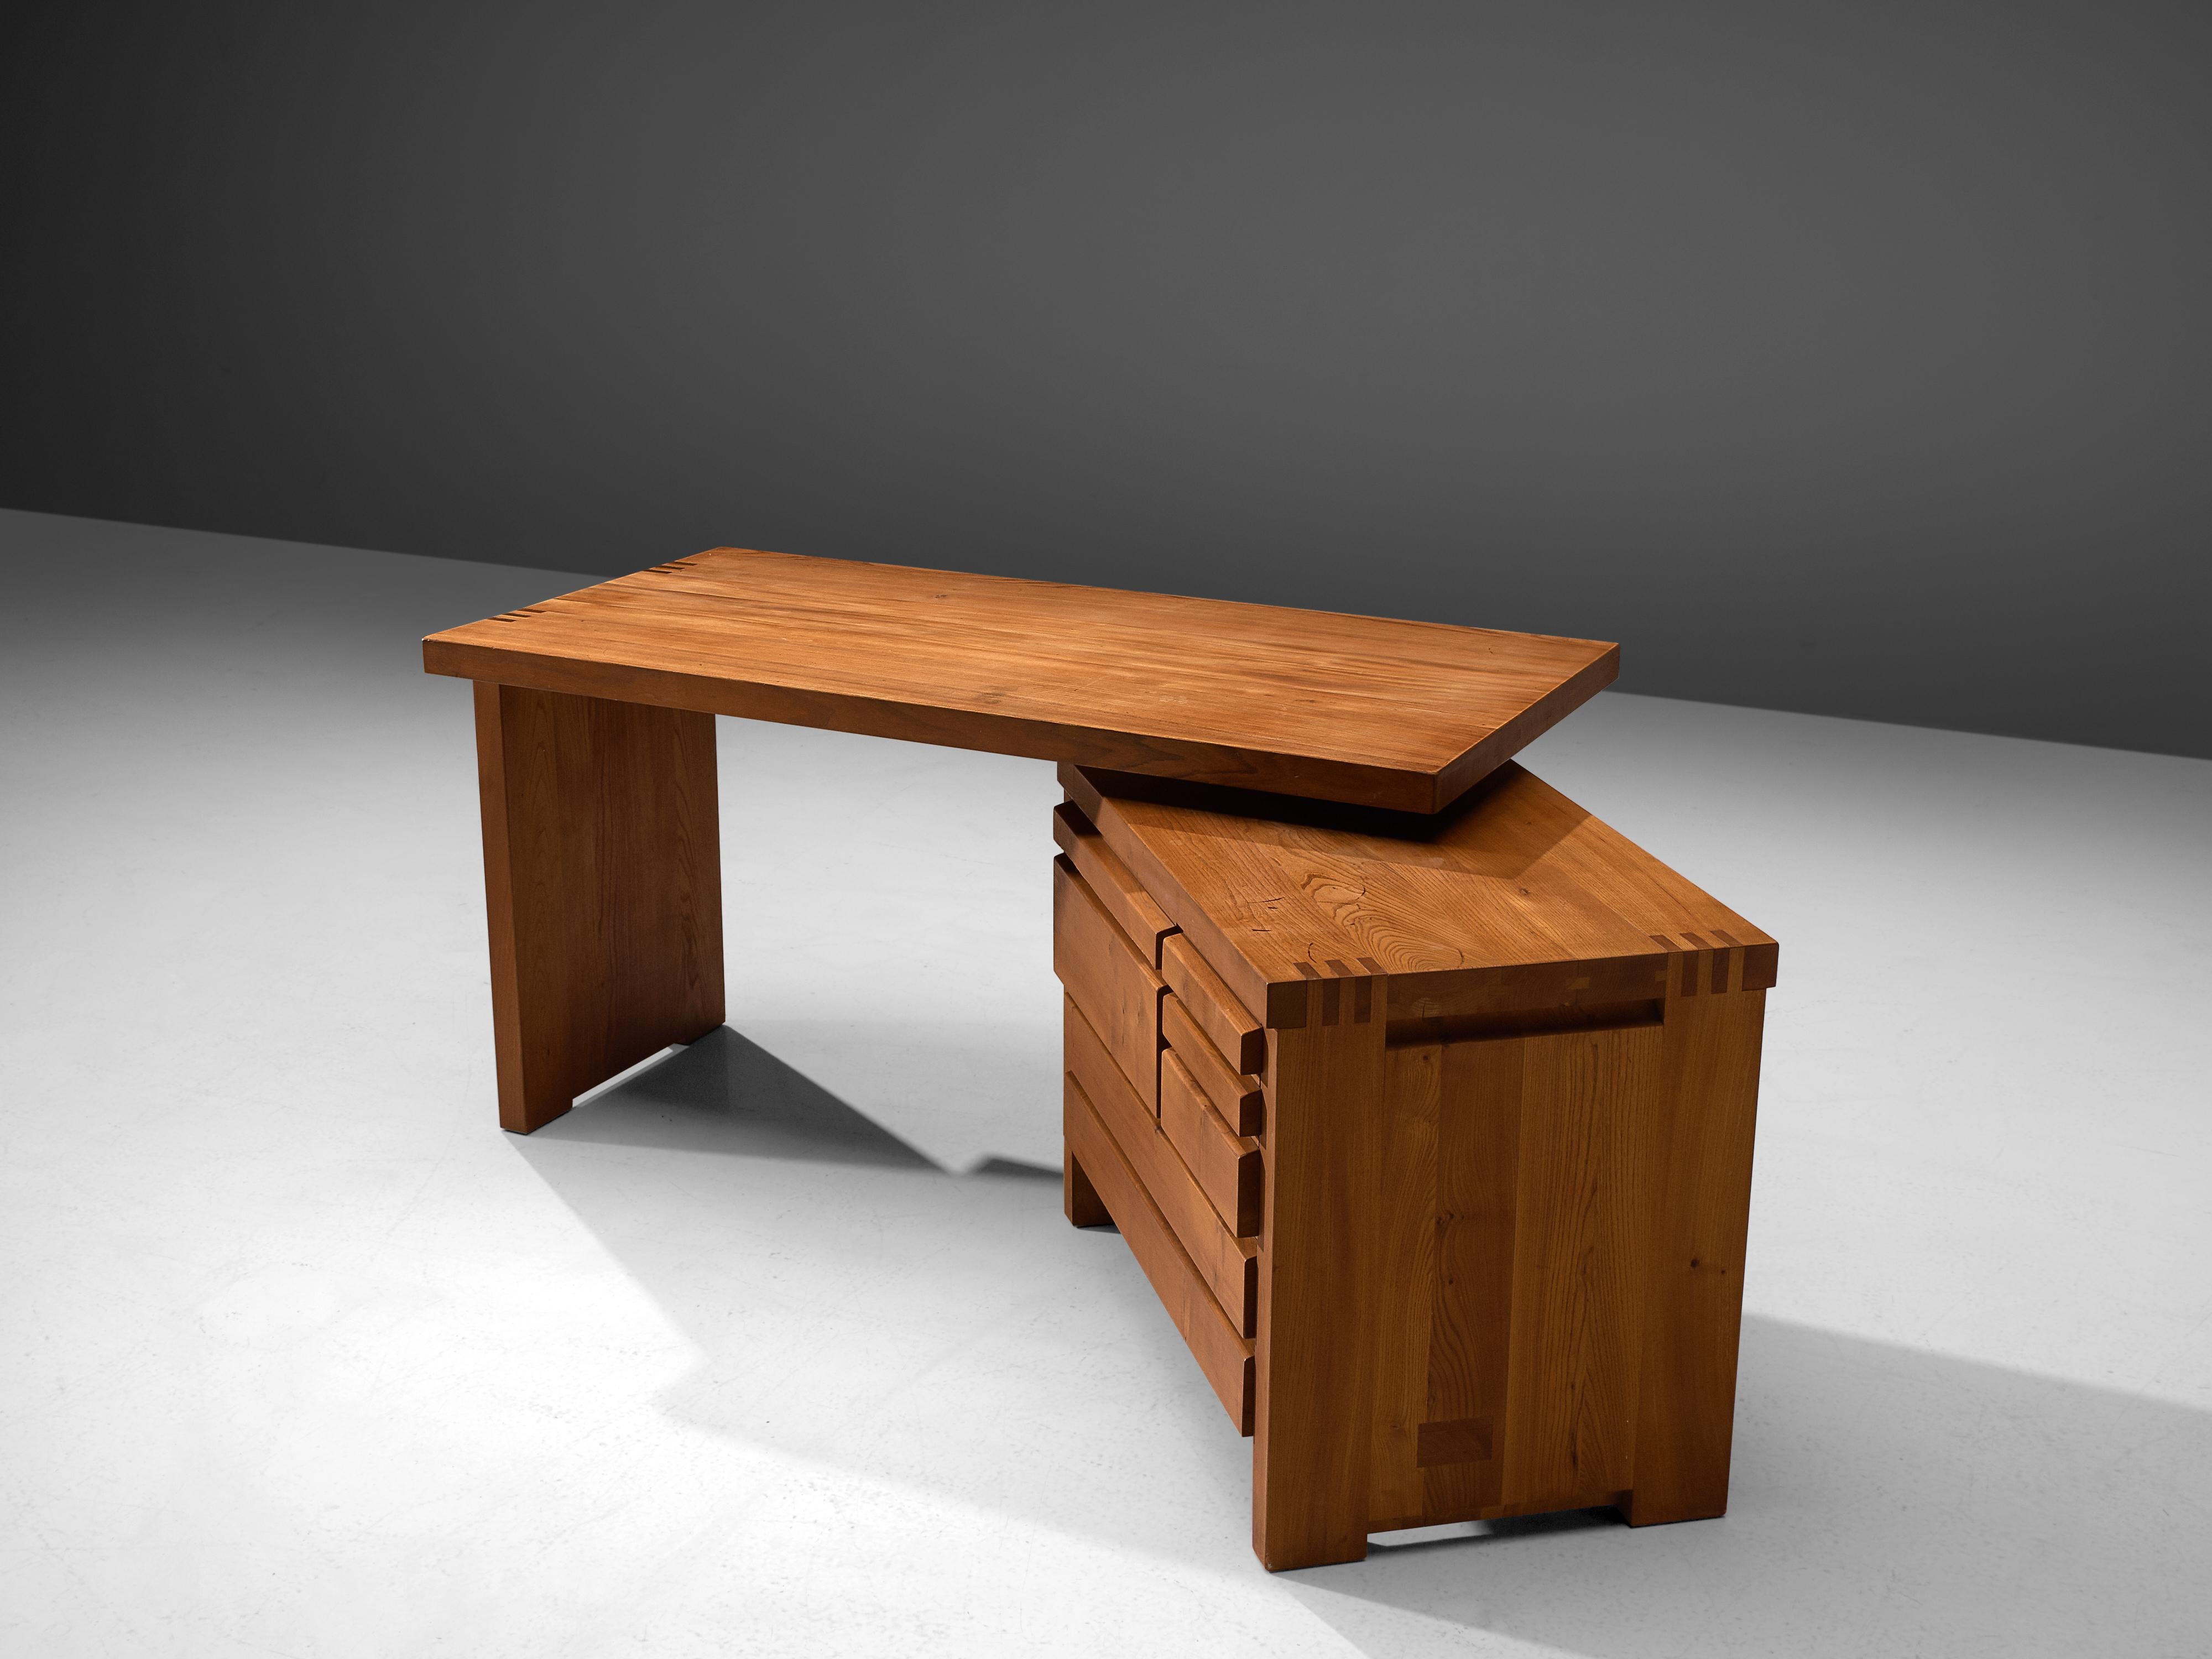 Pierre Chapo, desk model B19, elm, France, 1960s.

Executive desk in elmwood. The simplicity of this design is it's strength. The quality of the elmwood structure is sublime, it's kept together with beautifully made wooden joints. The storage part